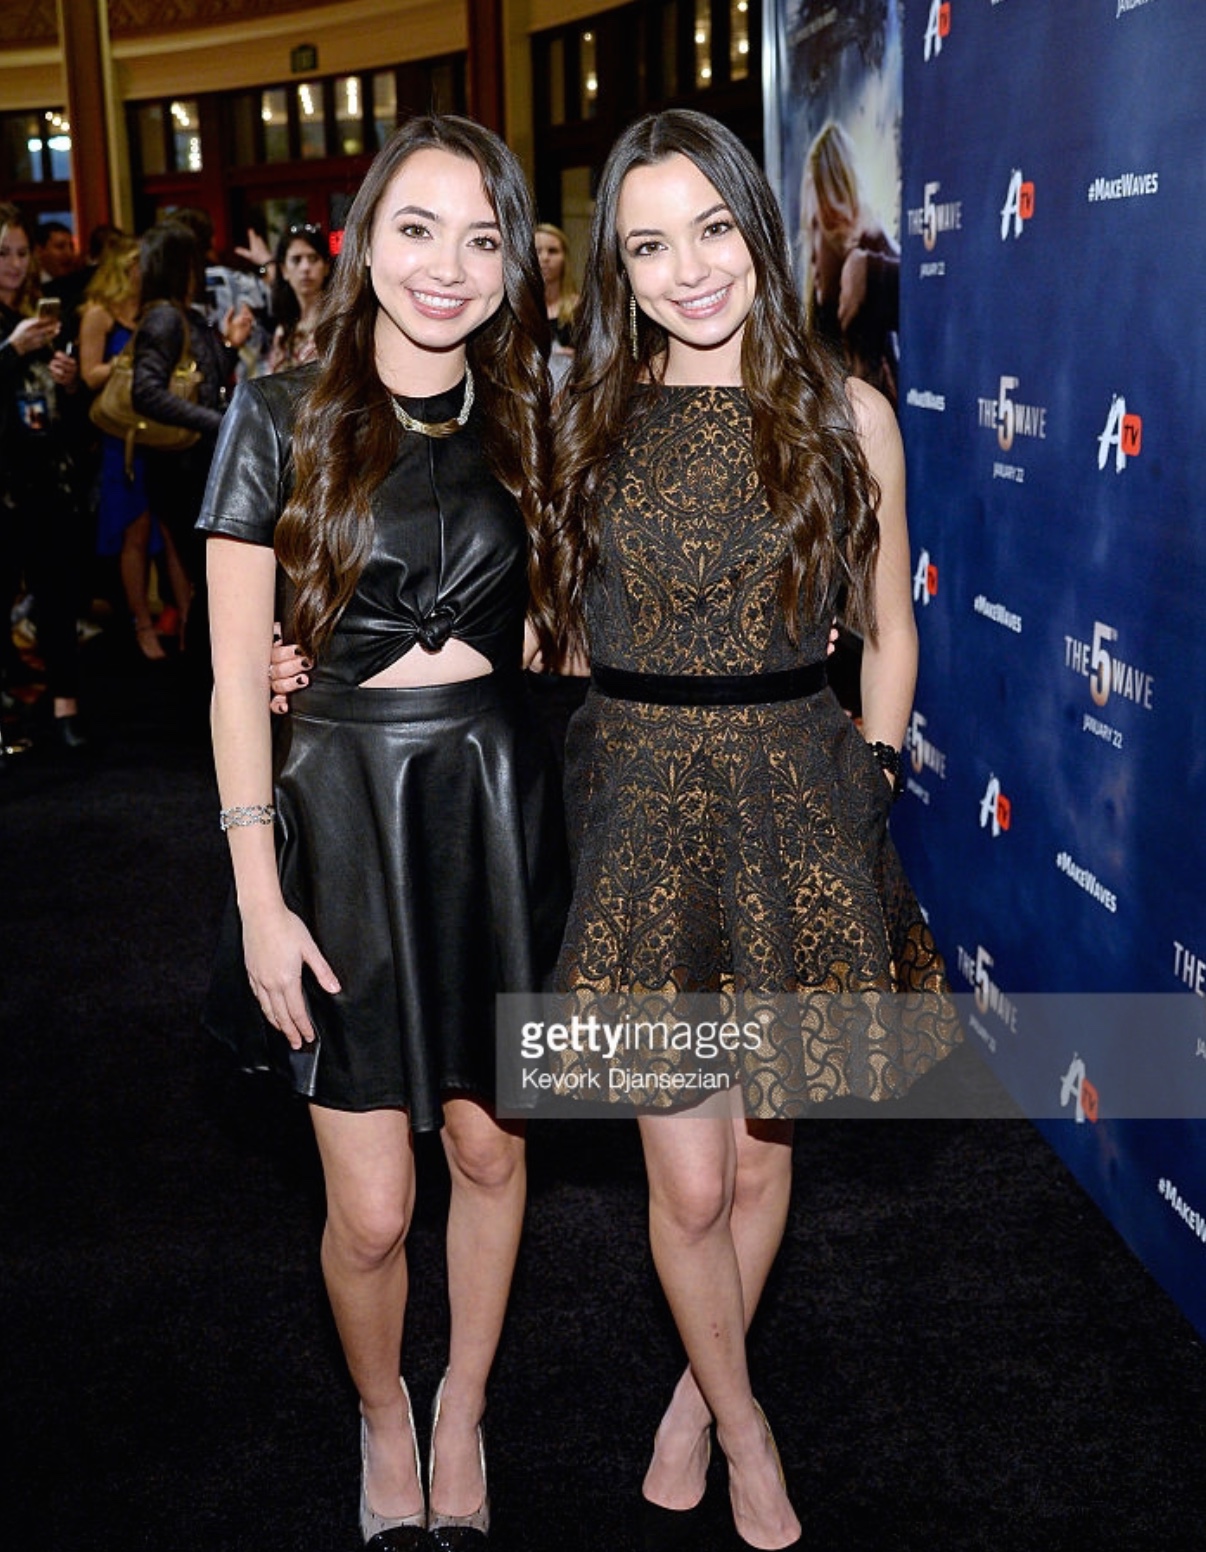 Veronica Merrell and Vanessa Merrell at event of The 5th Wave movie premiere (2016)